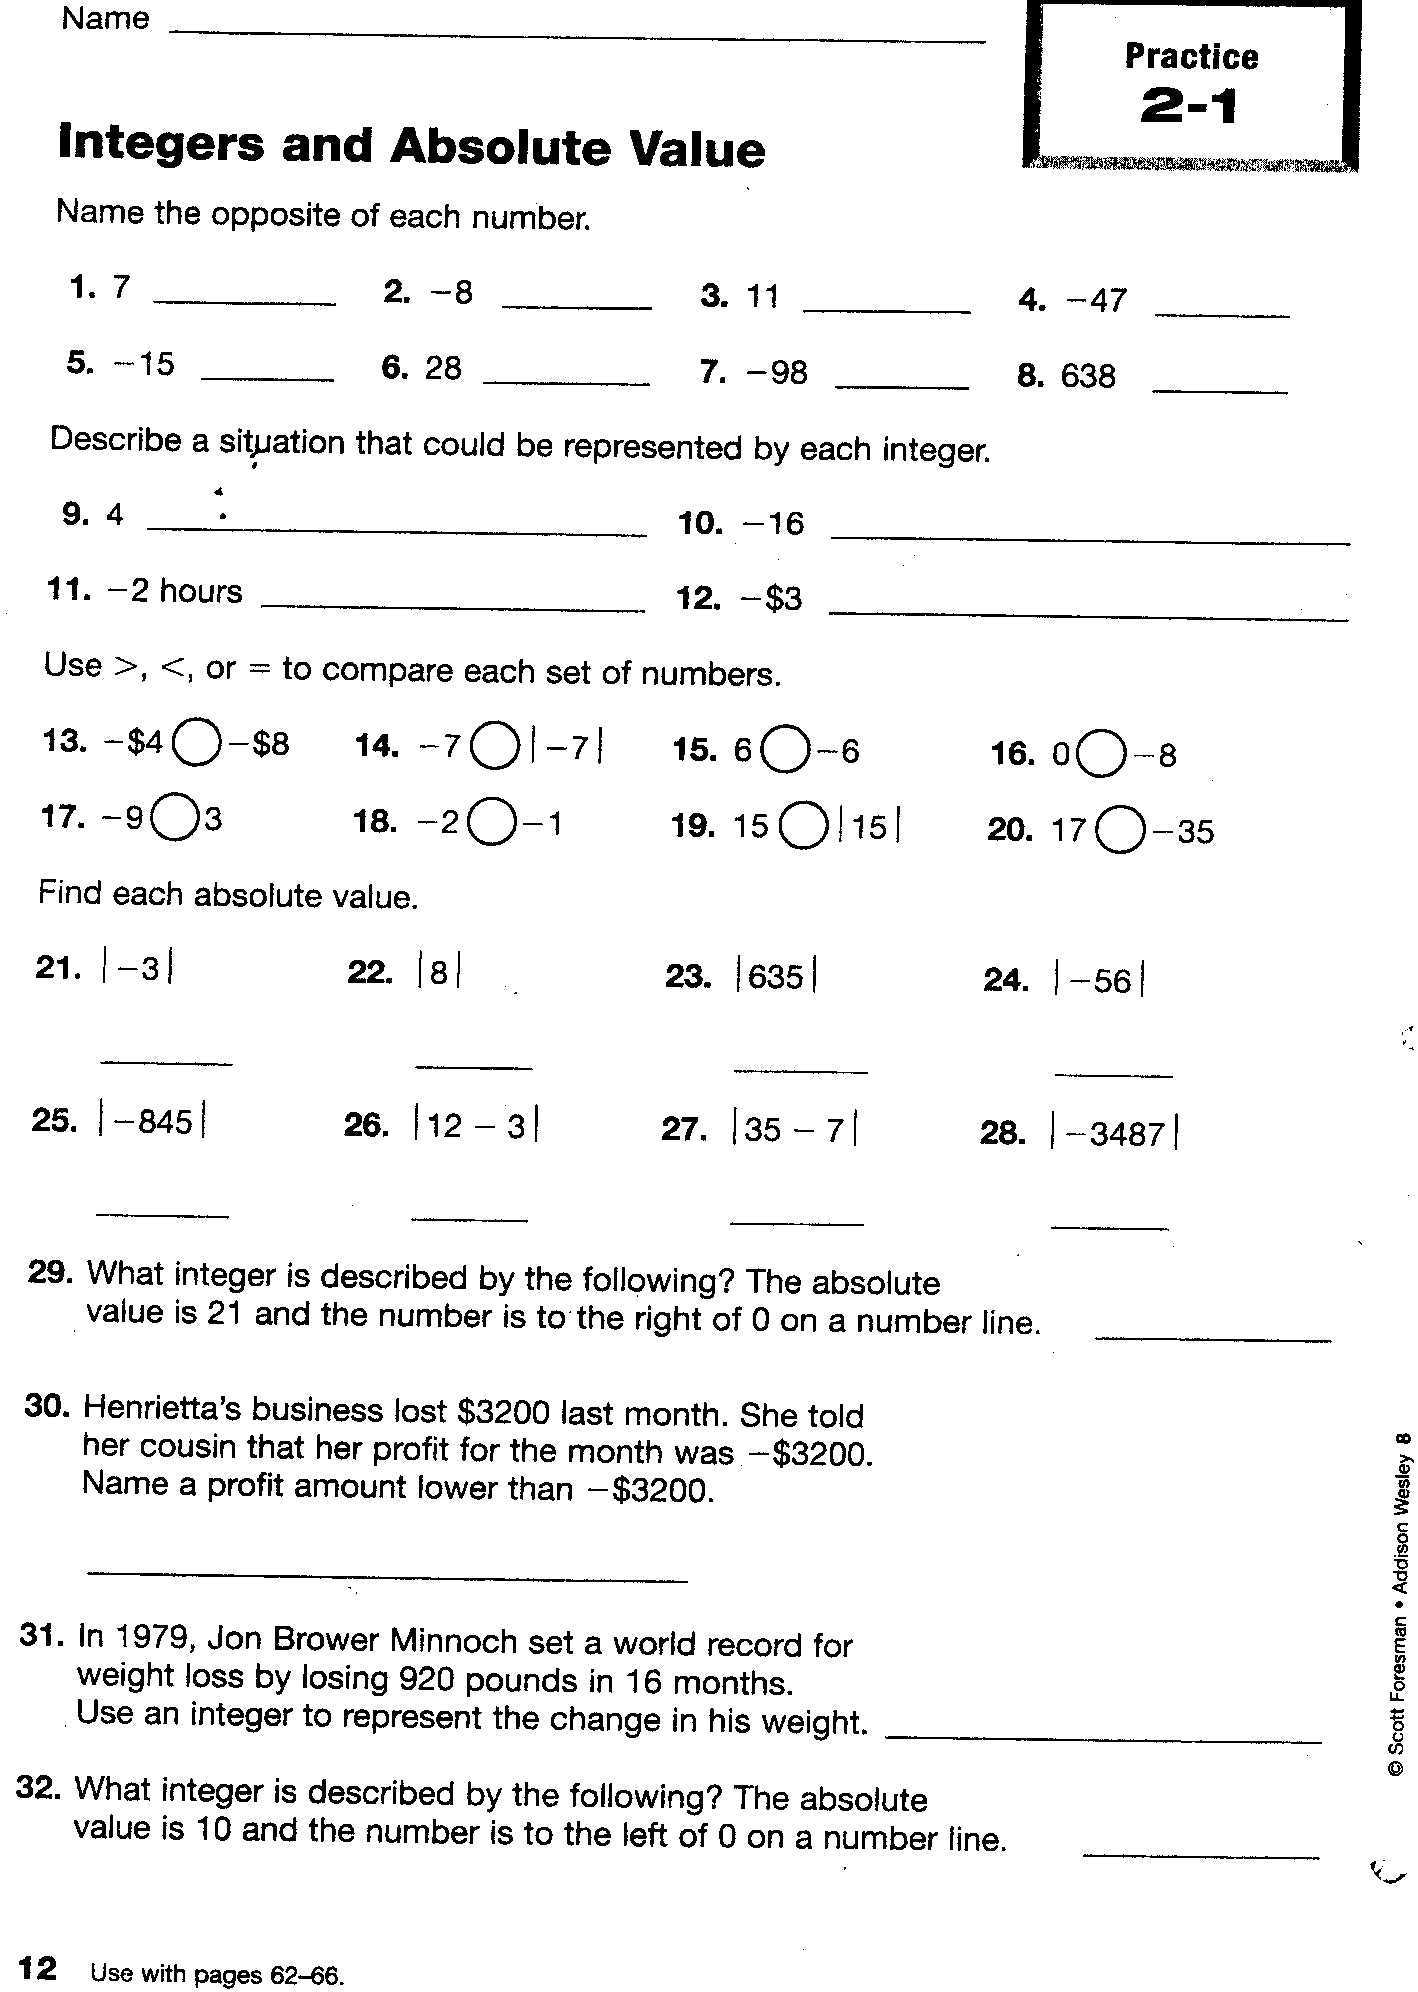 Free Printable Ged Worksheets Along With Printable Gede Worksheets - Free Printable Ged Worksheets